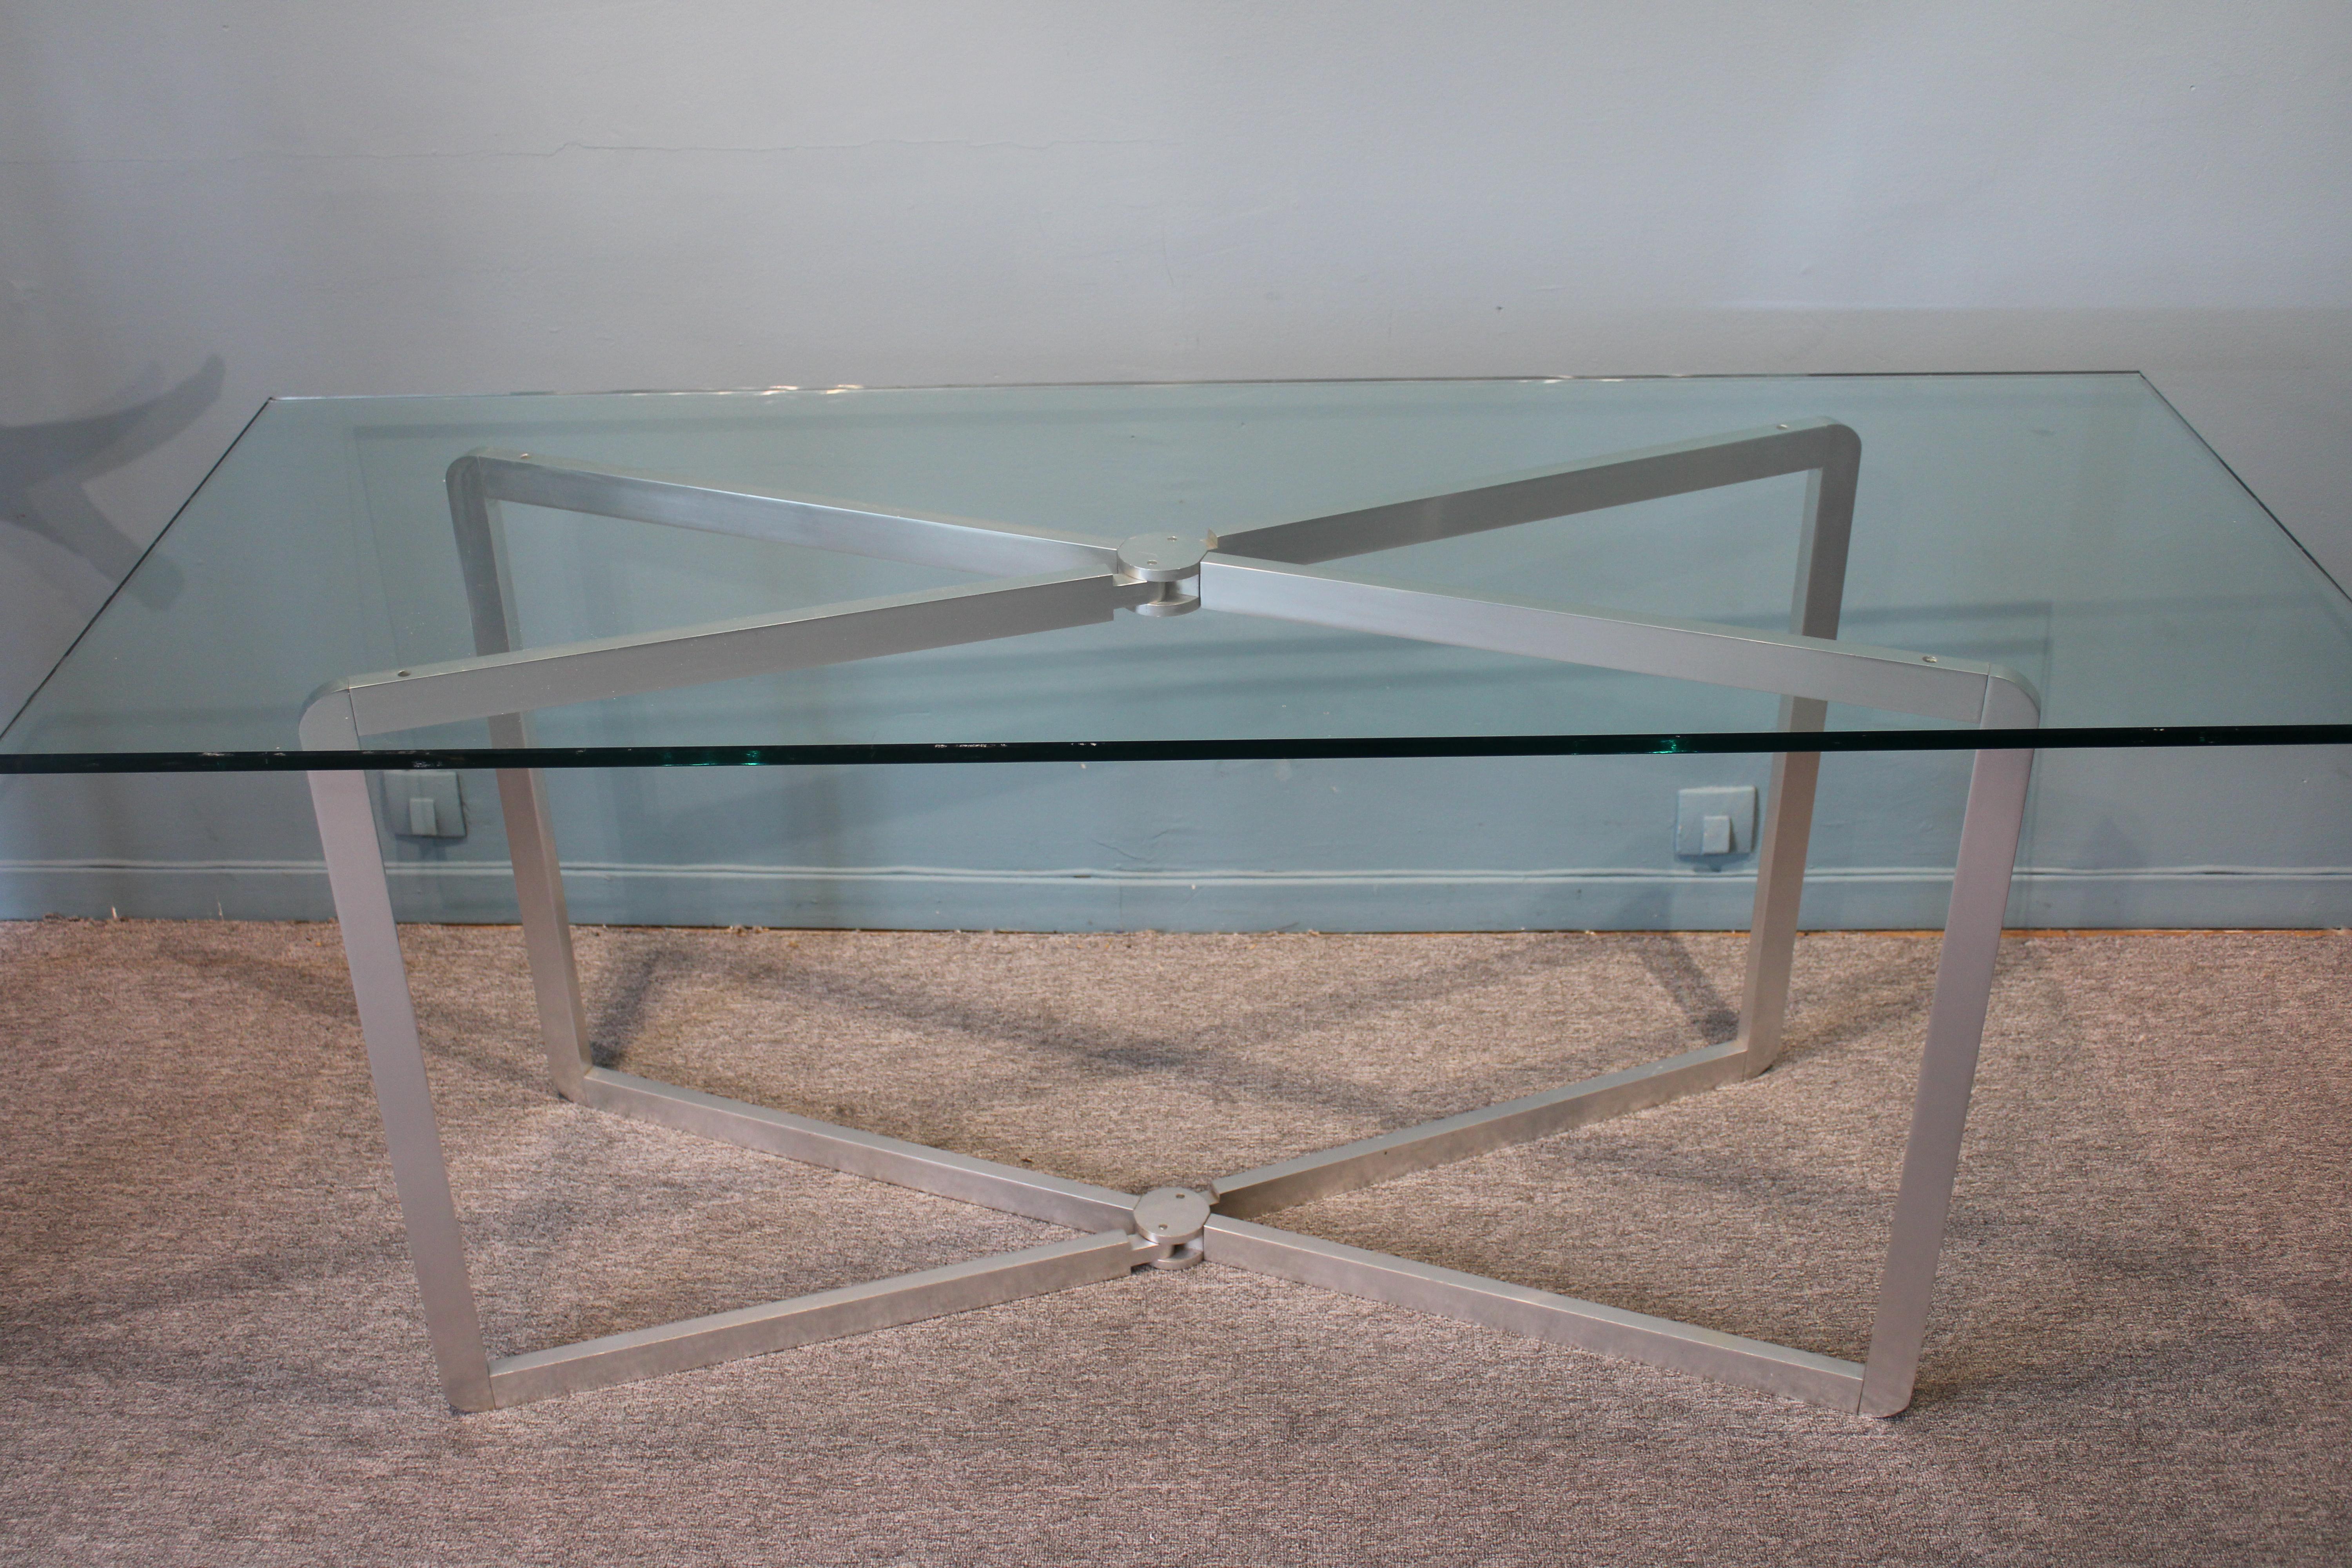 Vintage console table by Michel Boyer, circa 1968. 
Aluminum swivel base, glass top.